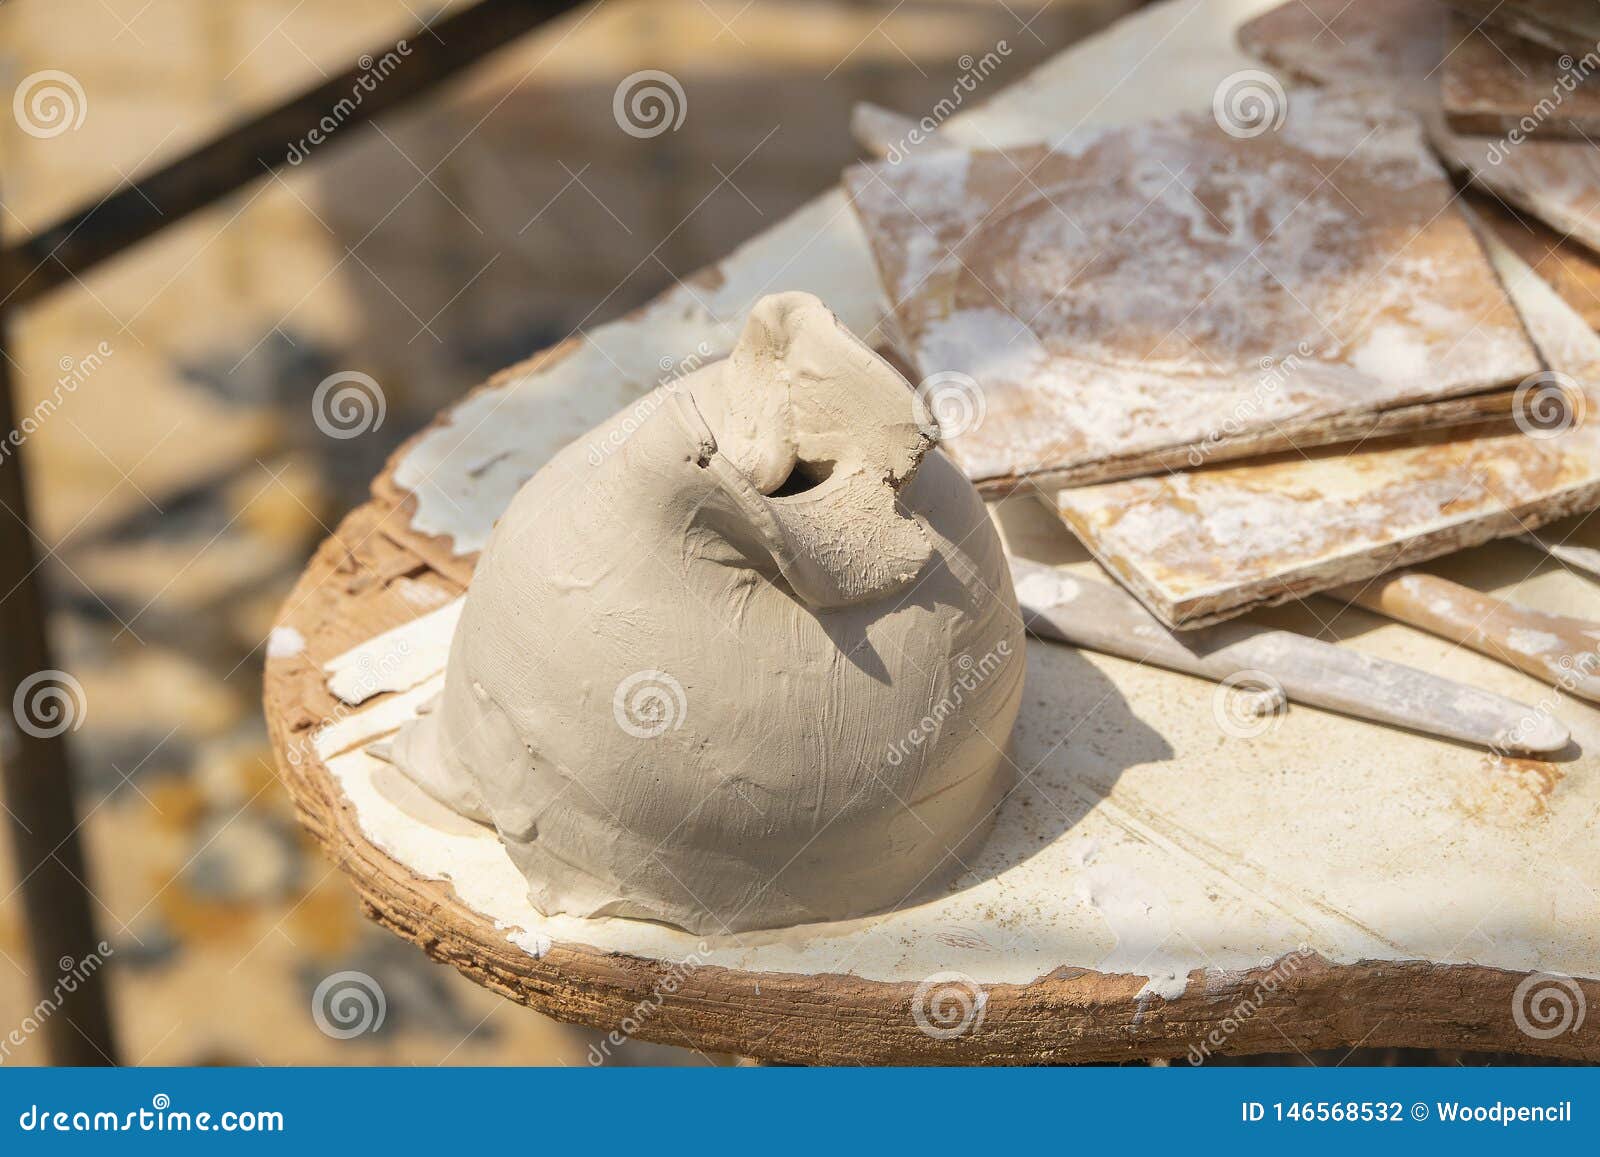 Raw Clay for Pottery Modeling with a Putty Knife and Molding Tools. Summer  Outdoor Pottery Workspace Stock Photo - Image of making, hobbies: 146568532